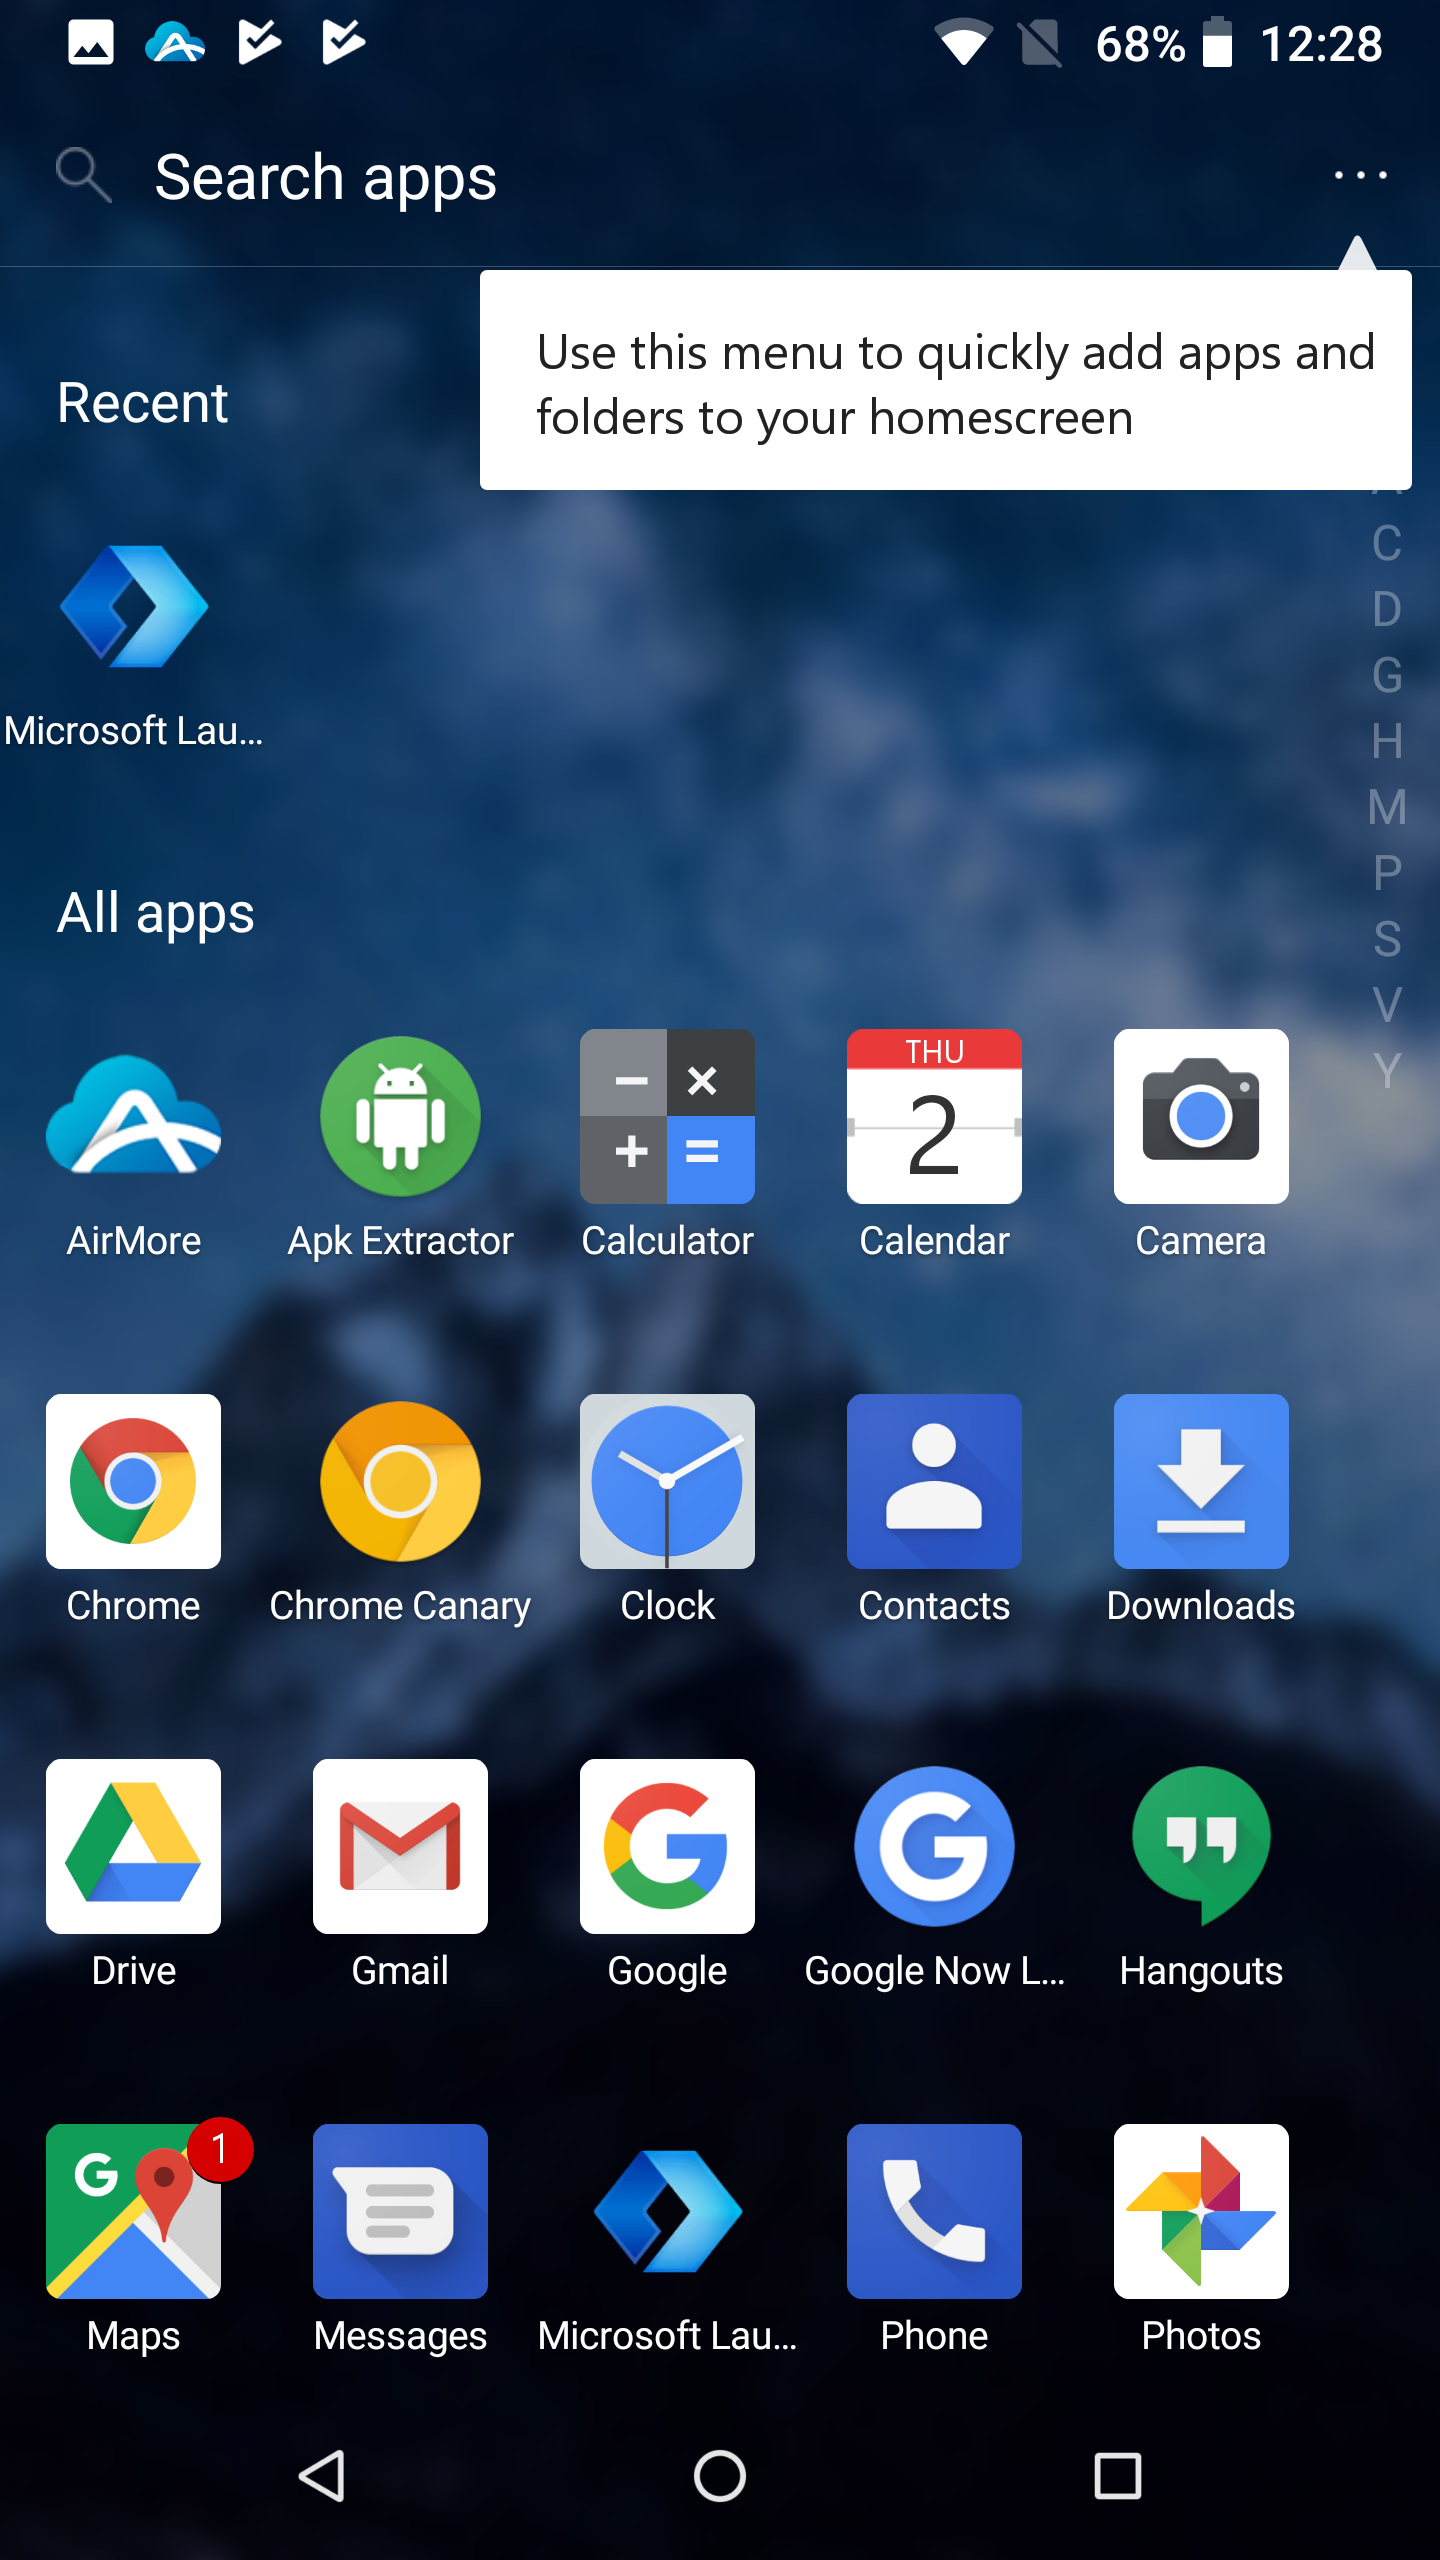 Microsoft Launcher 4.12 for Android Now Available for Download